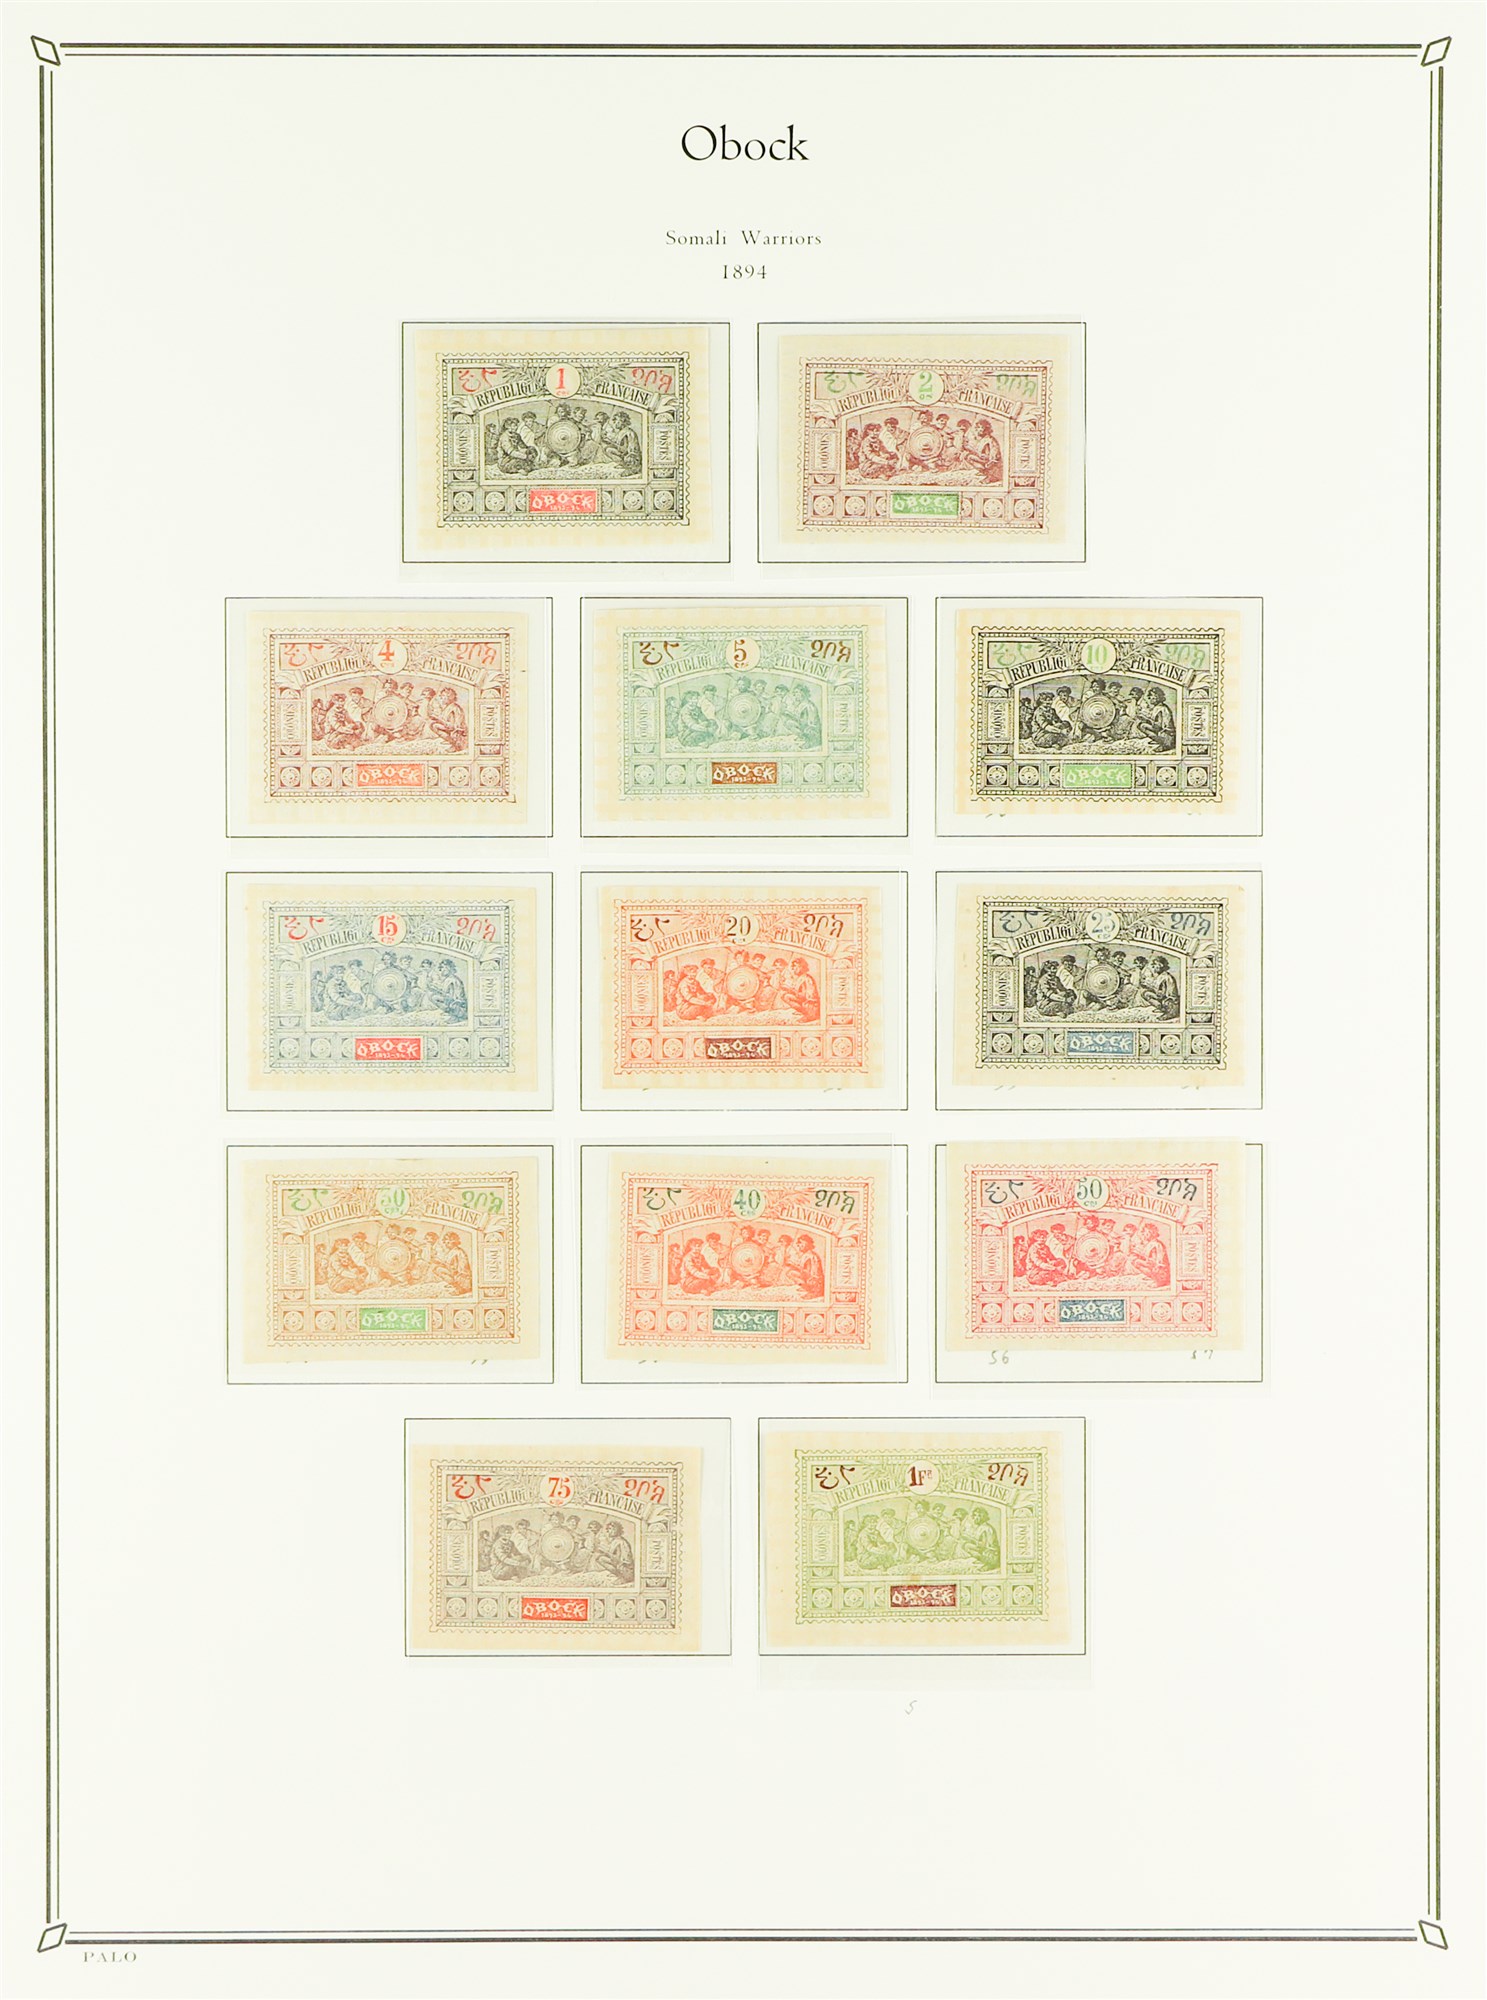 FRENCH COLONIES OBOCK 1892 - 1894 COLLECTION of 35+ mint stamps on Palo hingeless album pages,